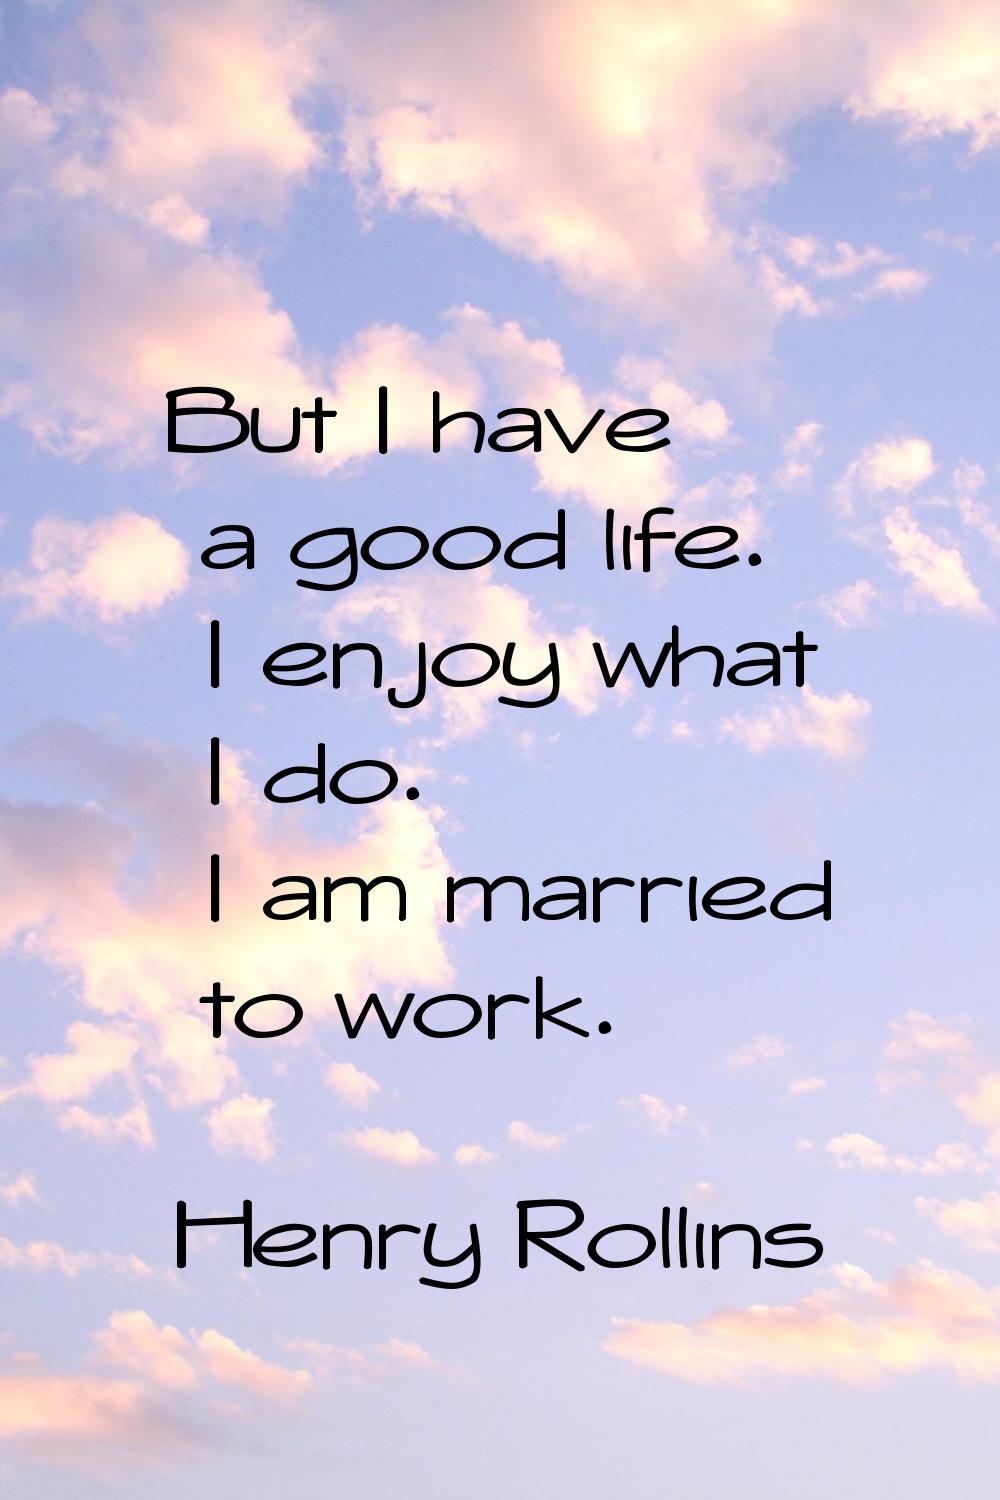 But I have a good life. I enjoy what I do. I am married to work.